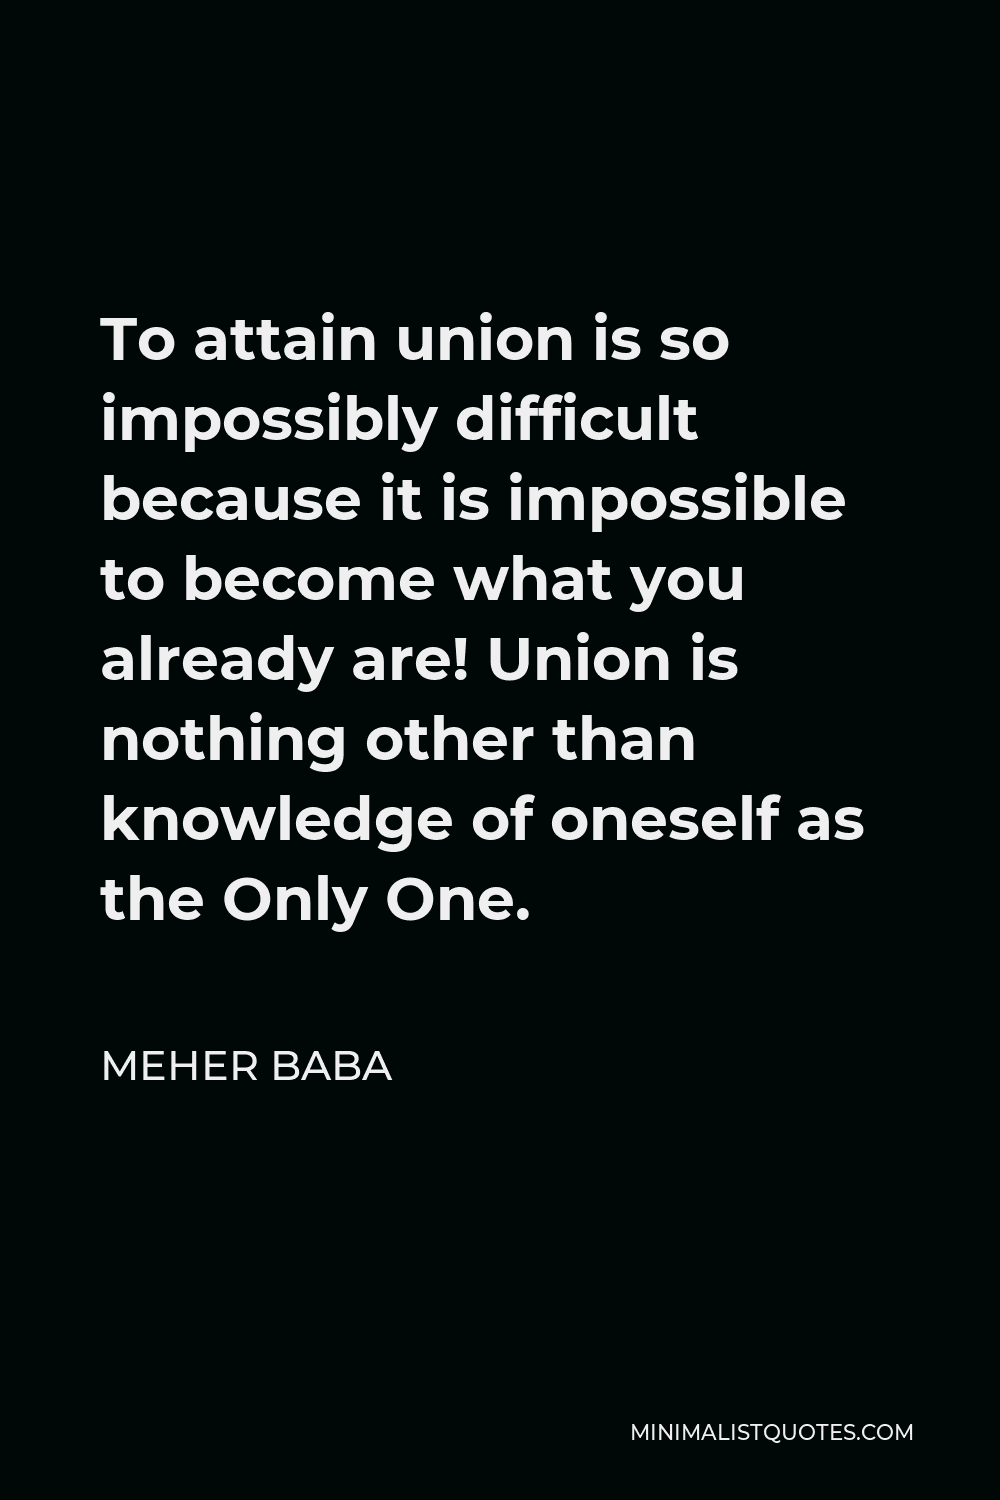 Meher Baba Quote - To attain union is so impossibly difficult because it is impossible to become what you already are! Union is nothing other than knowledge of oneself as the Only One.